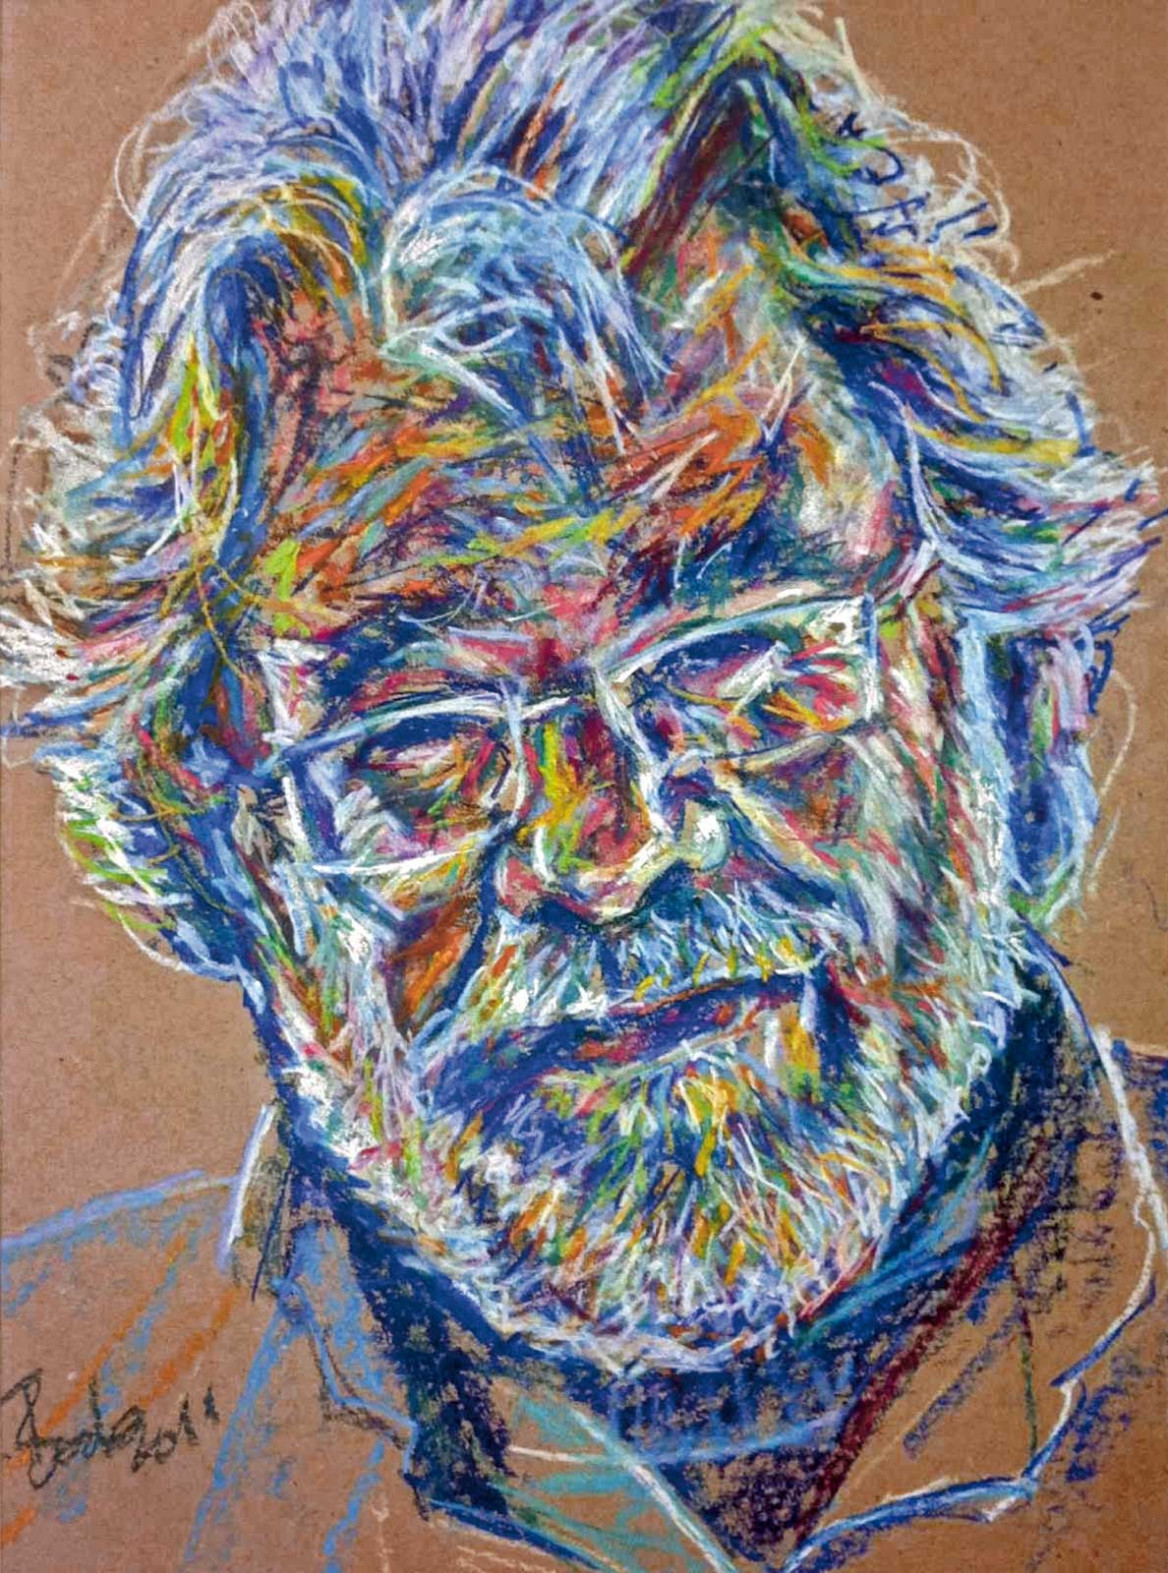 Colorful self-portrait of Bodo with beard